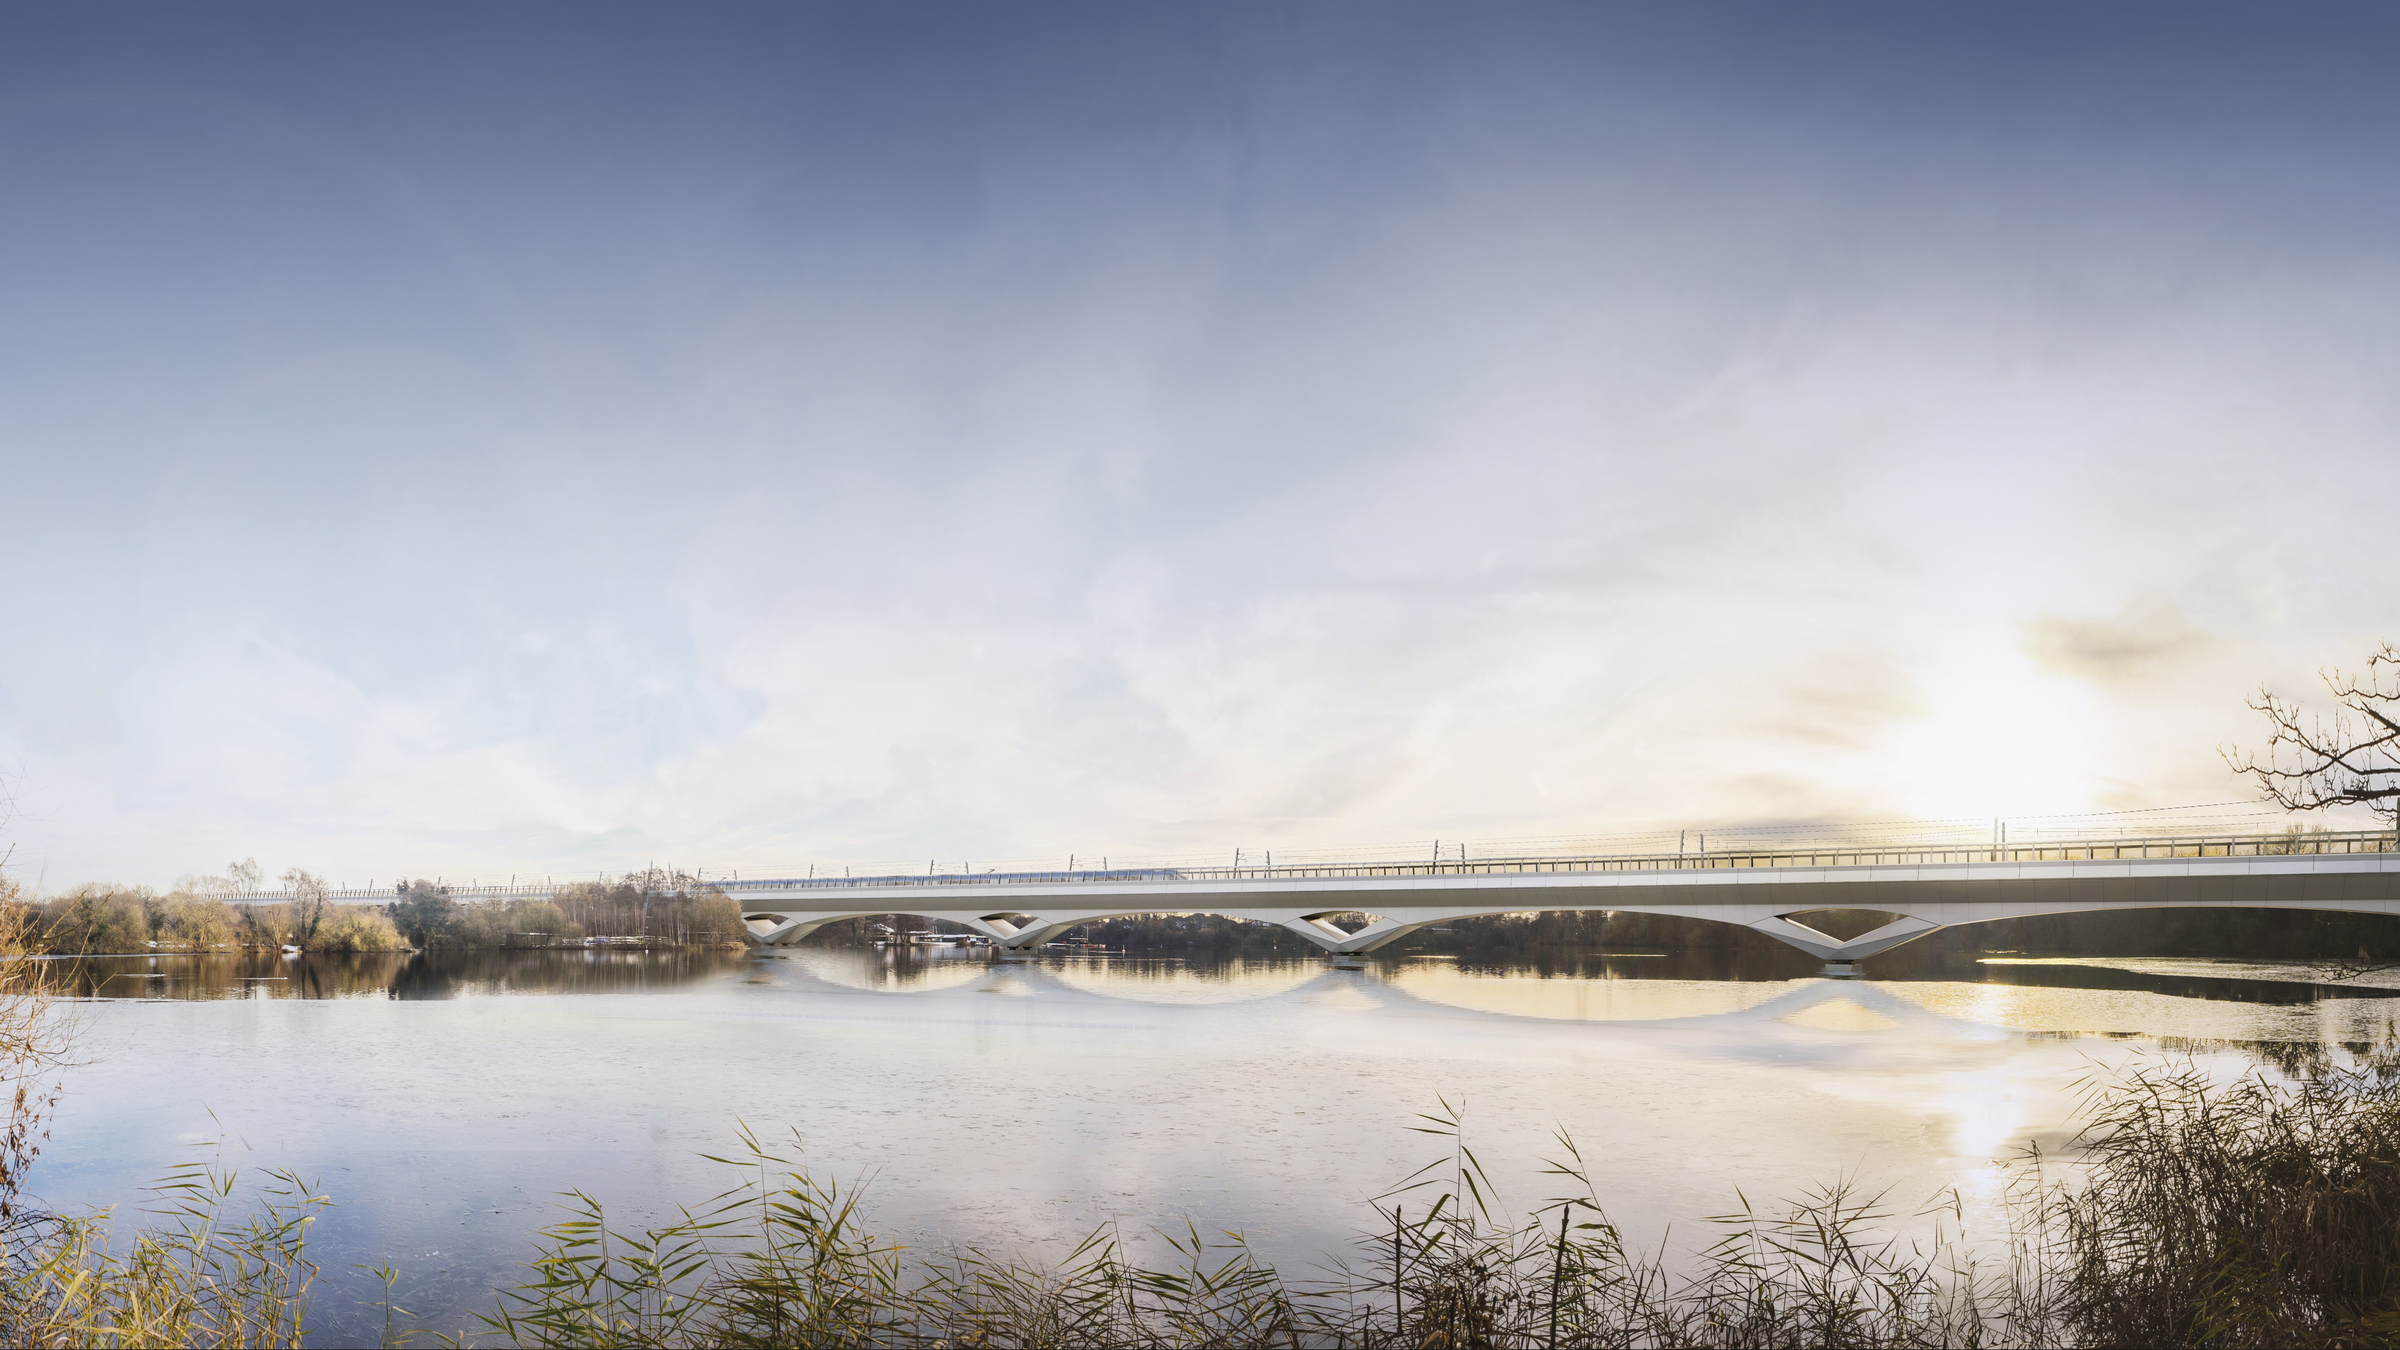 Colne Valley Viaduct concepts created for HS2 by Grimshaw Architects